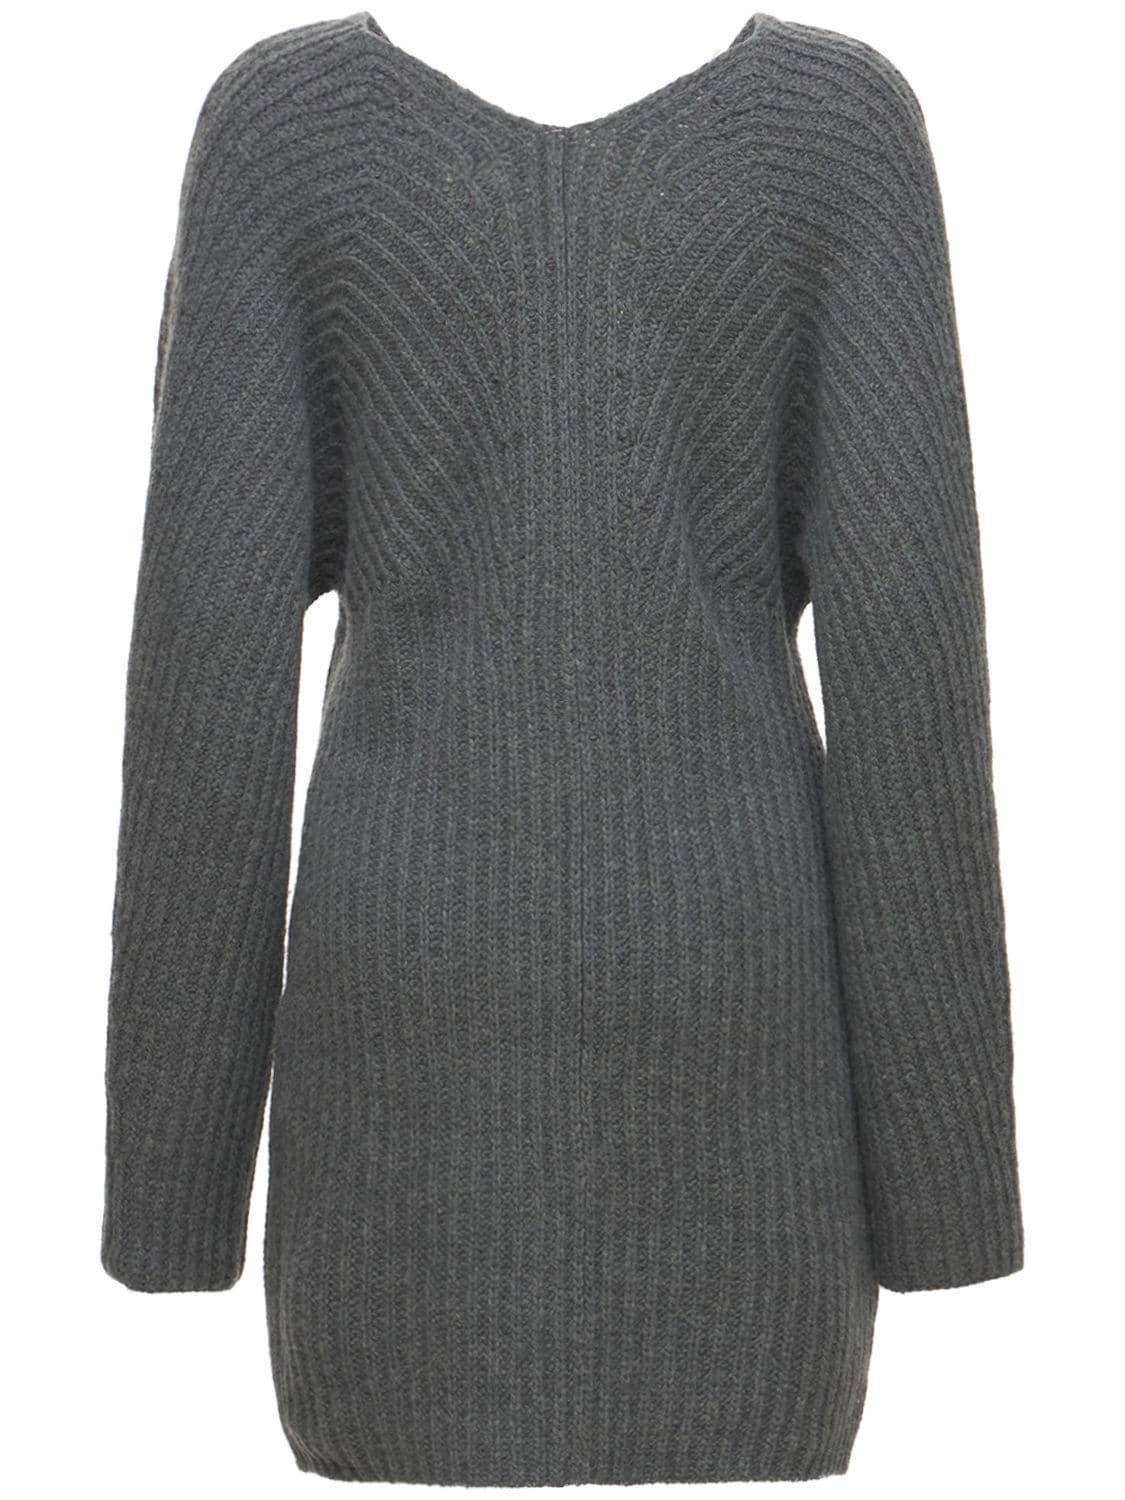 Theory Sculpted Wool & Cashmere Knit Mini Dress in Gray | Lyst